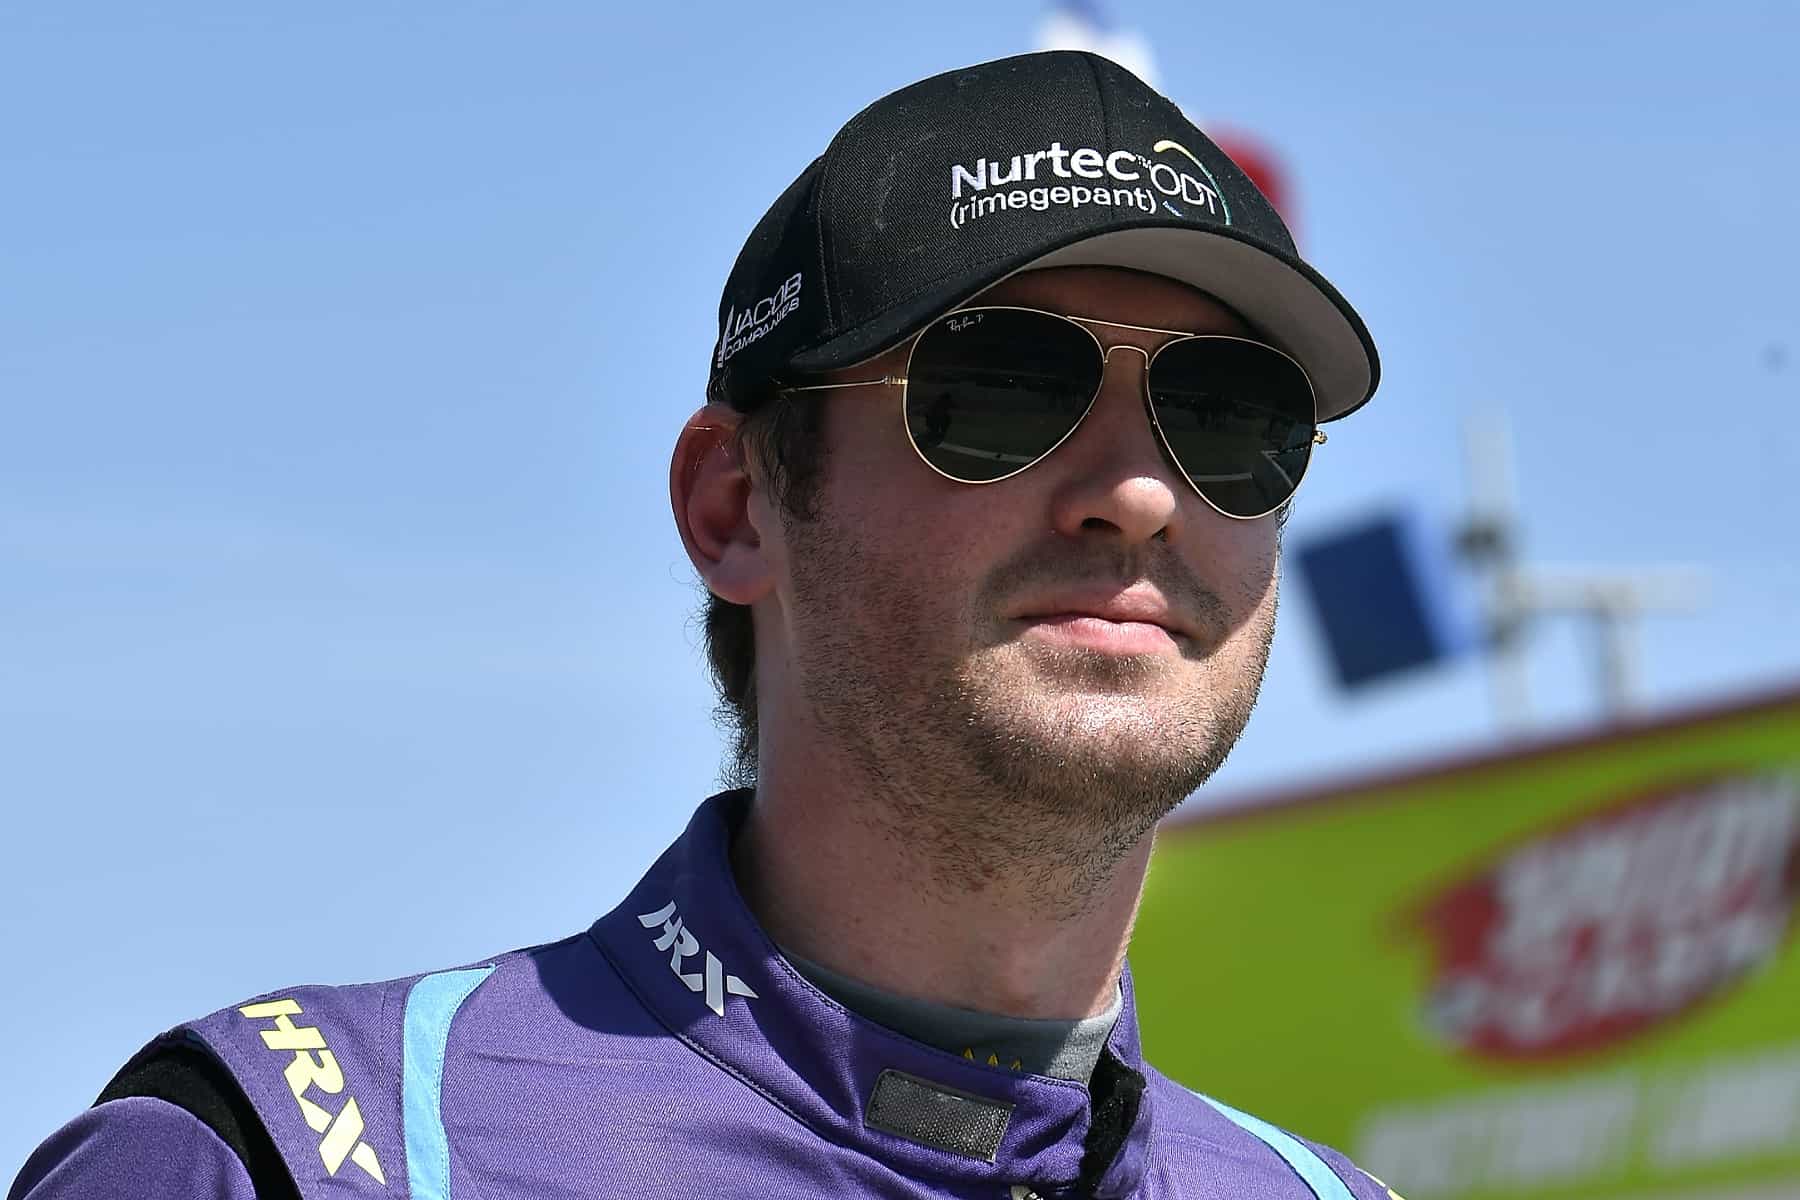 Cody Ware has been among the most vocal drivers in NASCAR when it comes to the importance of mental health.